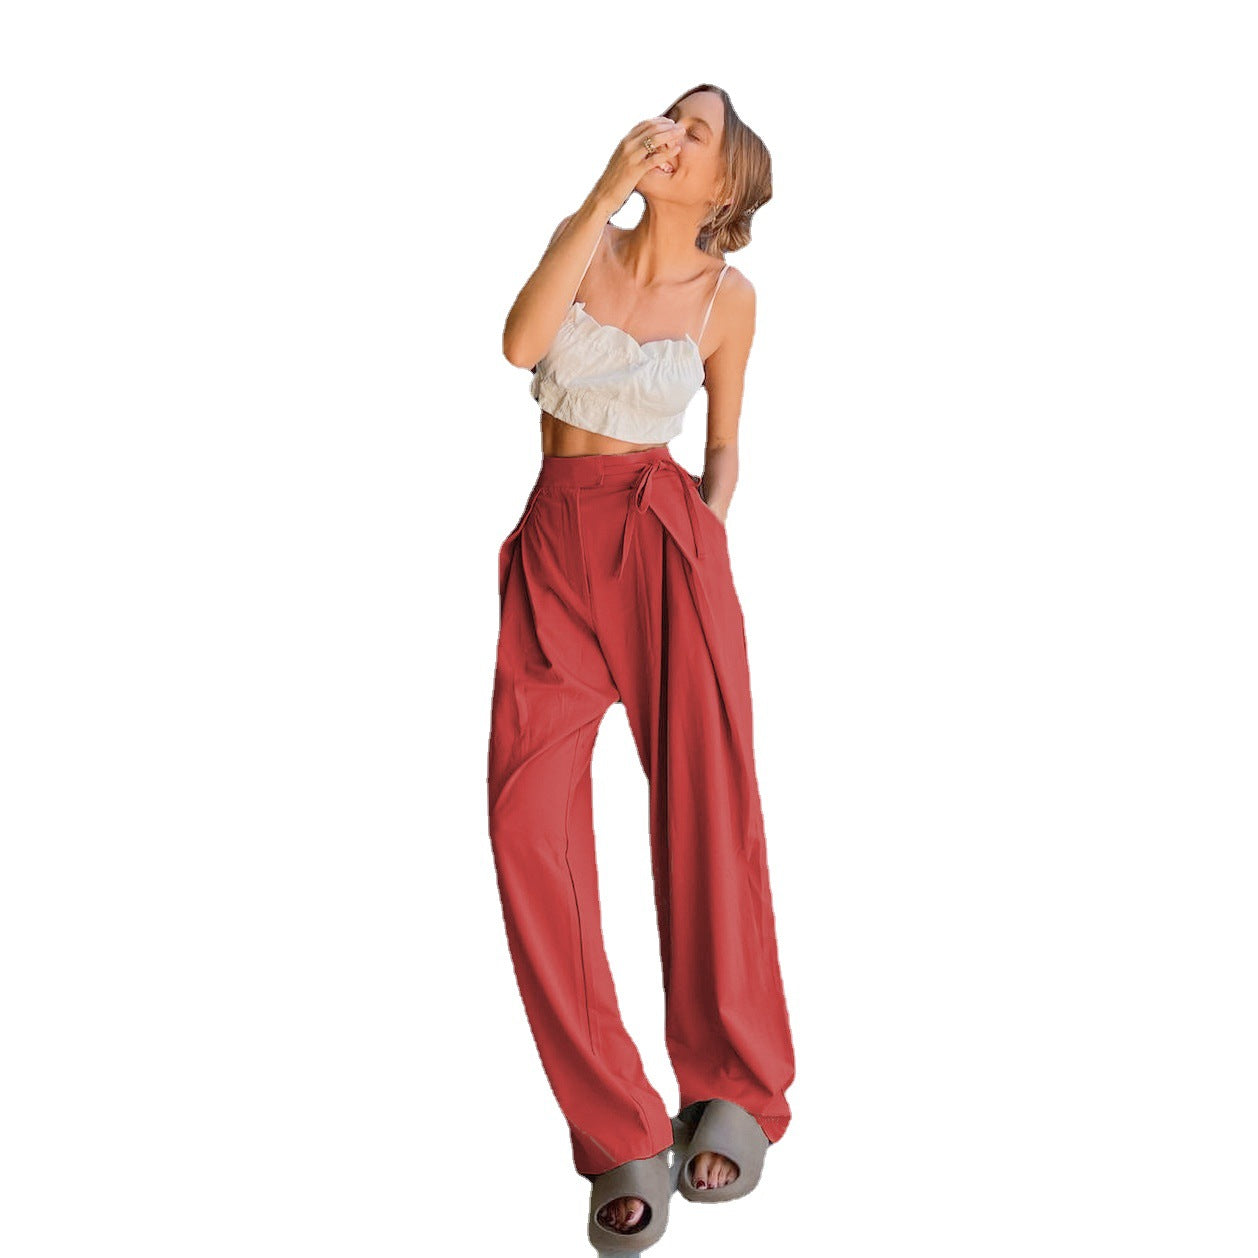 Women's Loose Draggle-tail Trousers Straight High Waist Pants